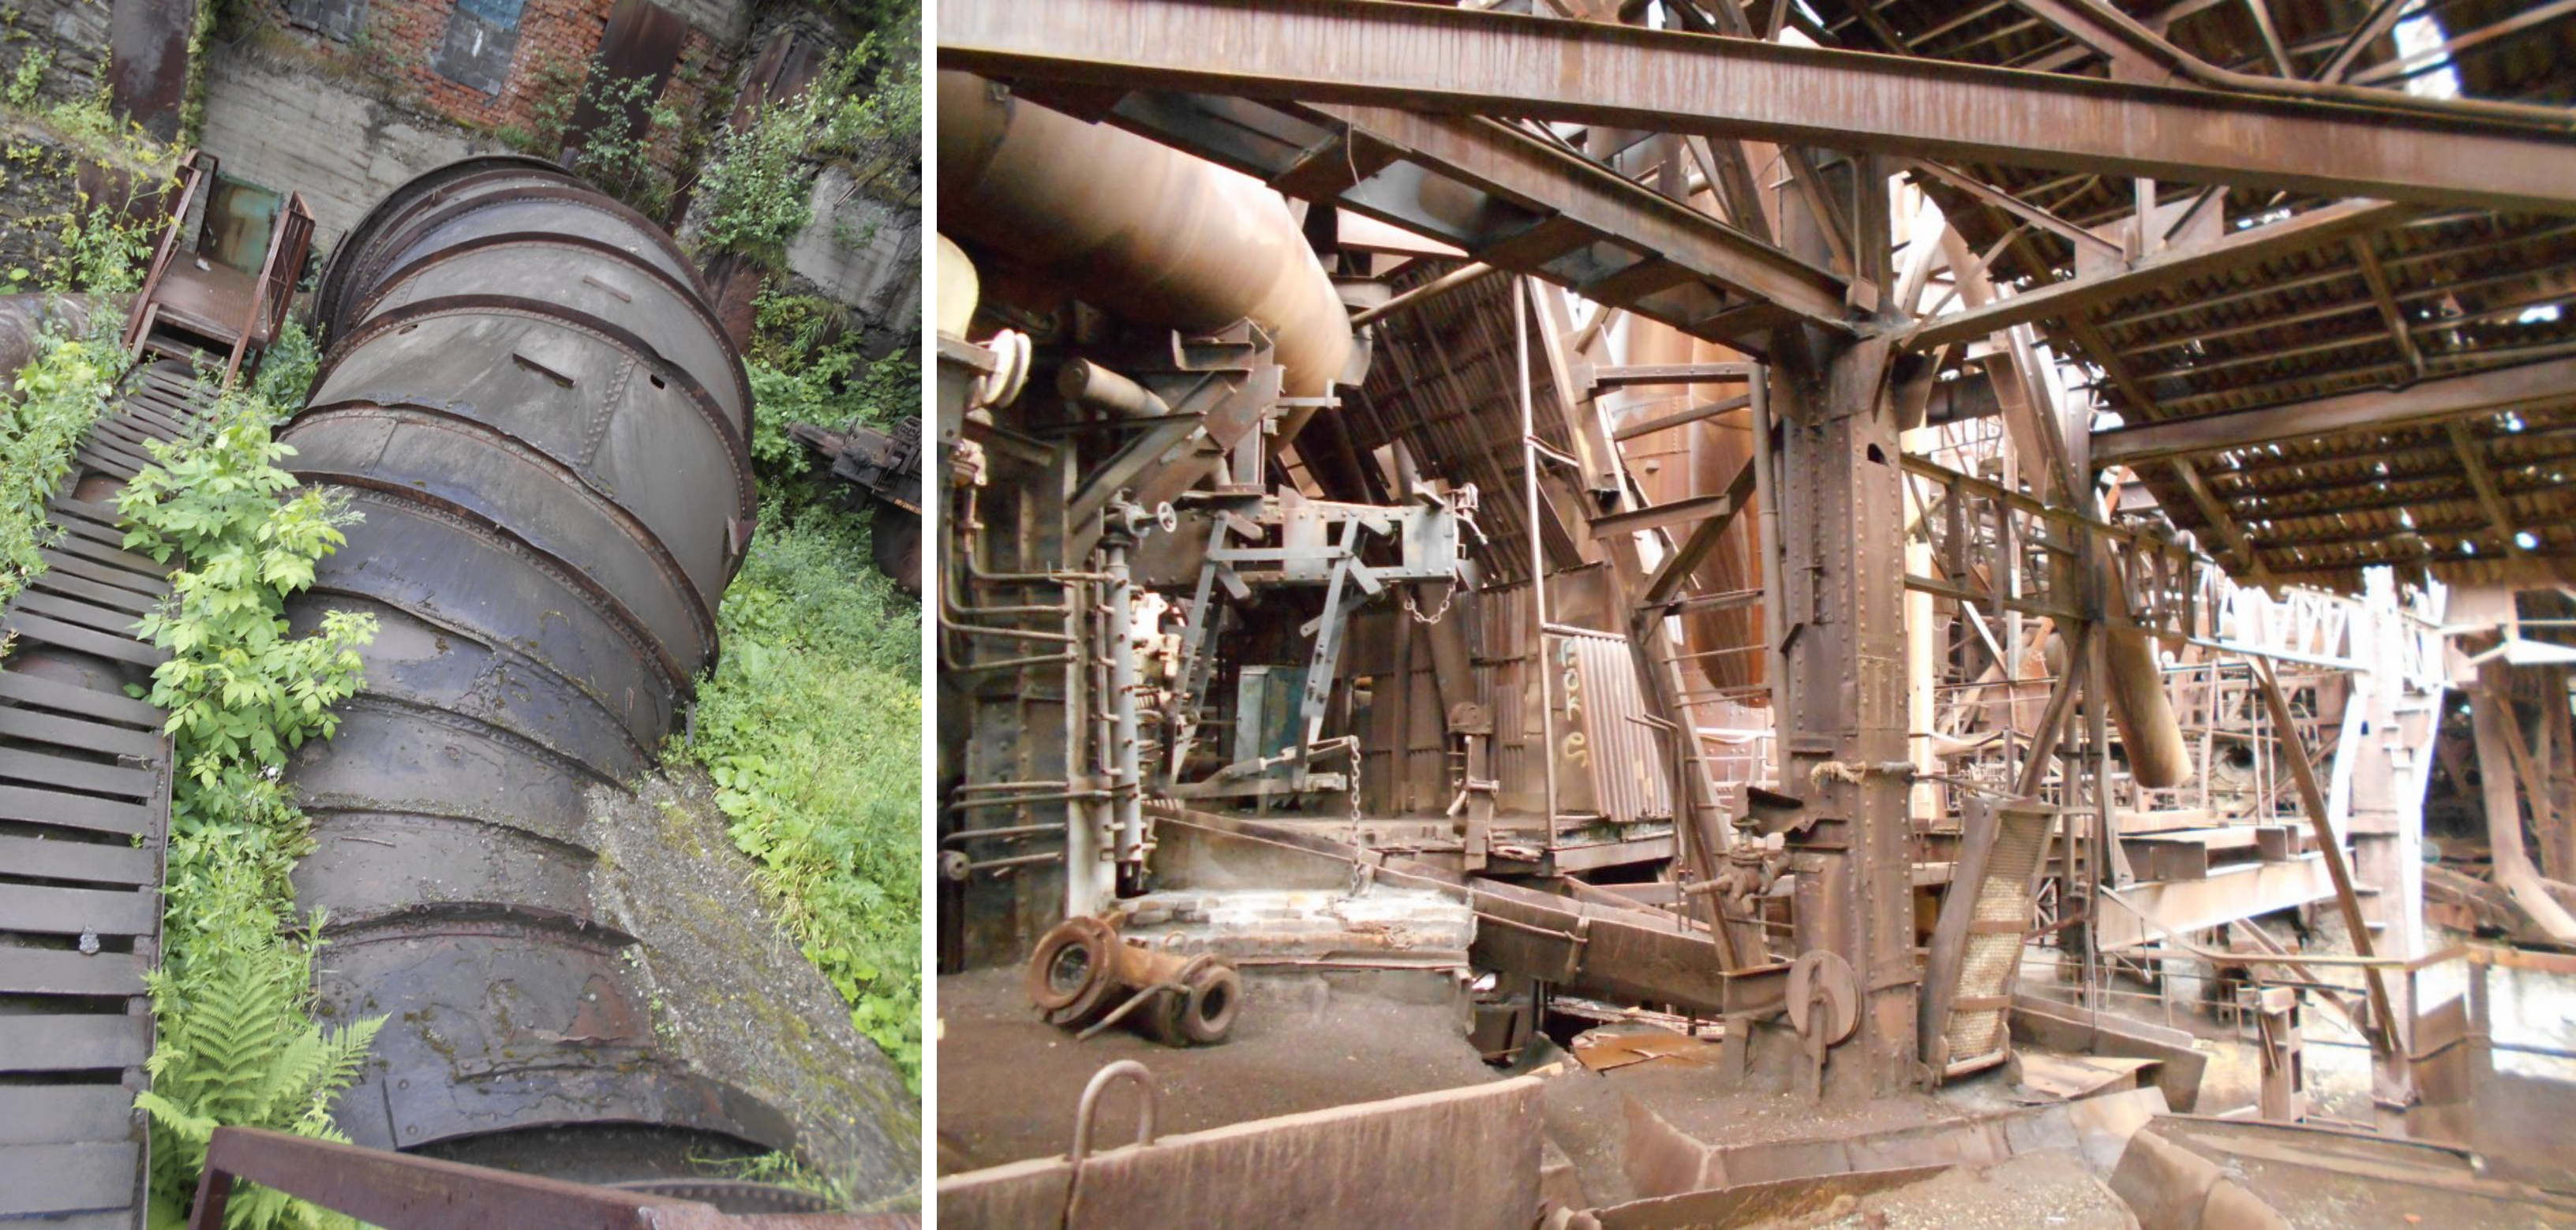 On the left, a pipe for diversion of spring floods at the factory. On the right, the factory-Museum at Nizhnii Tagil.